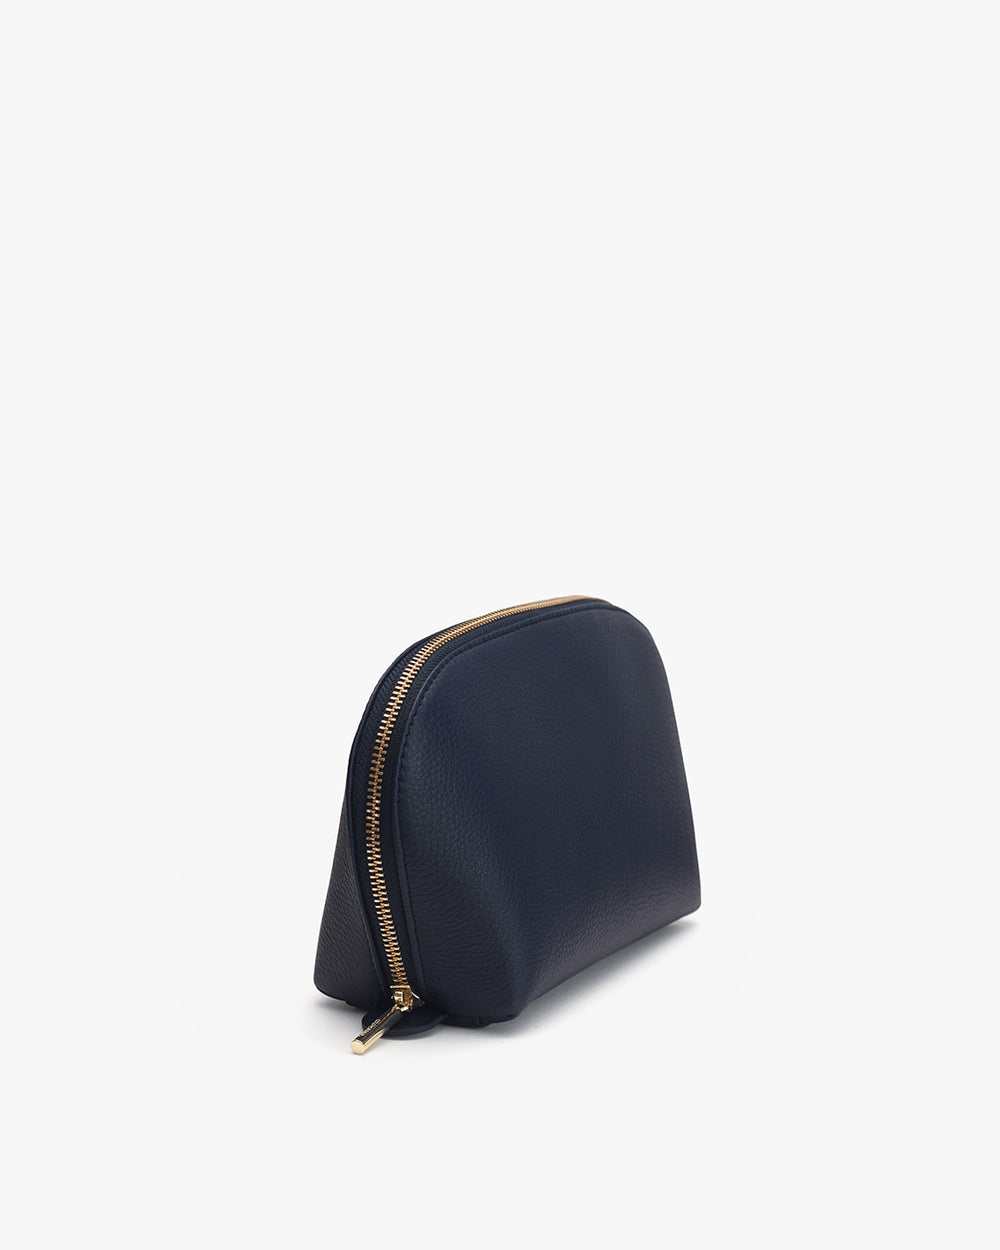 Small zipped cosmetic bag standing on a plain surface.